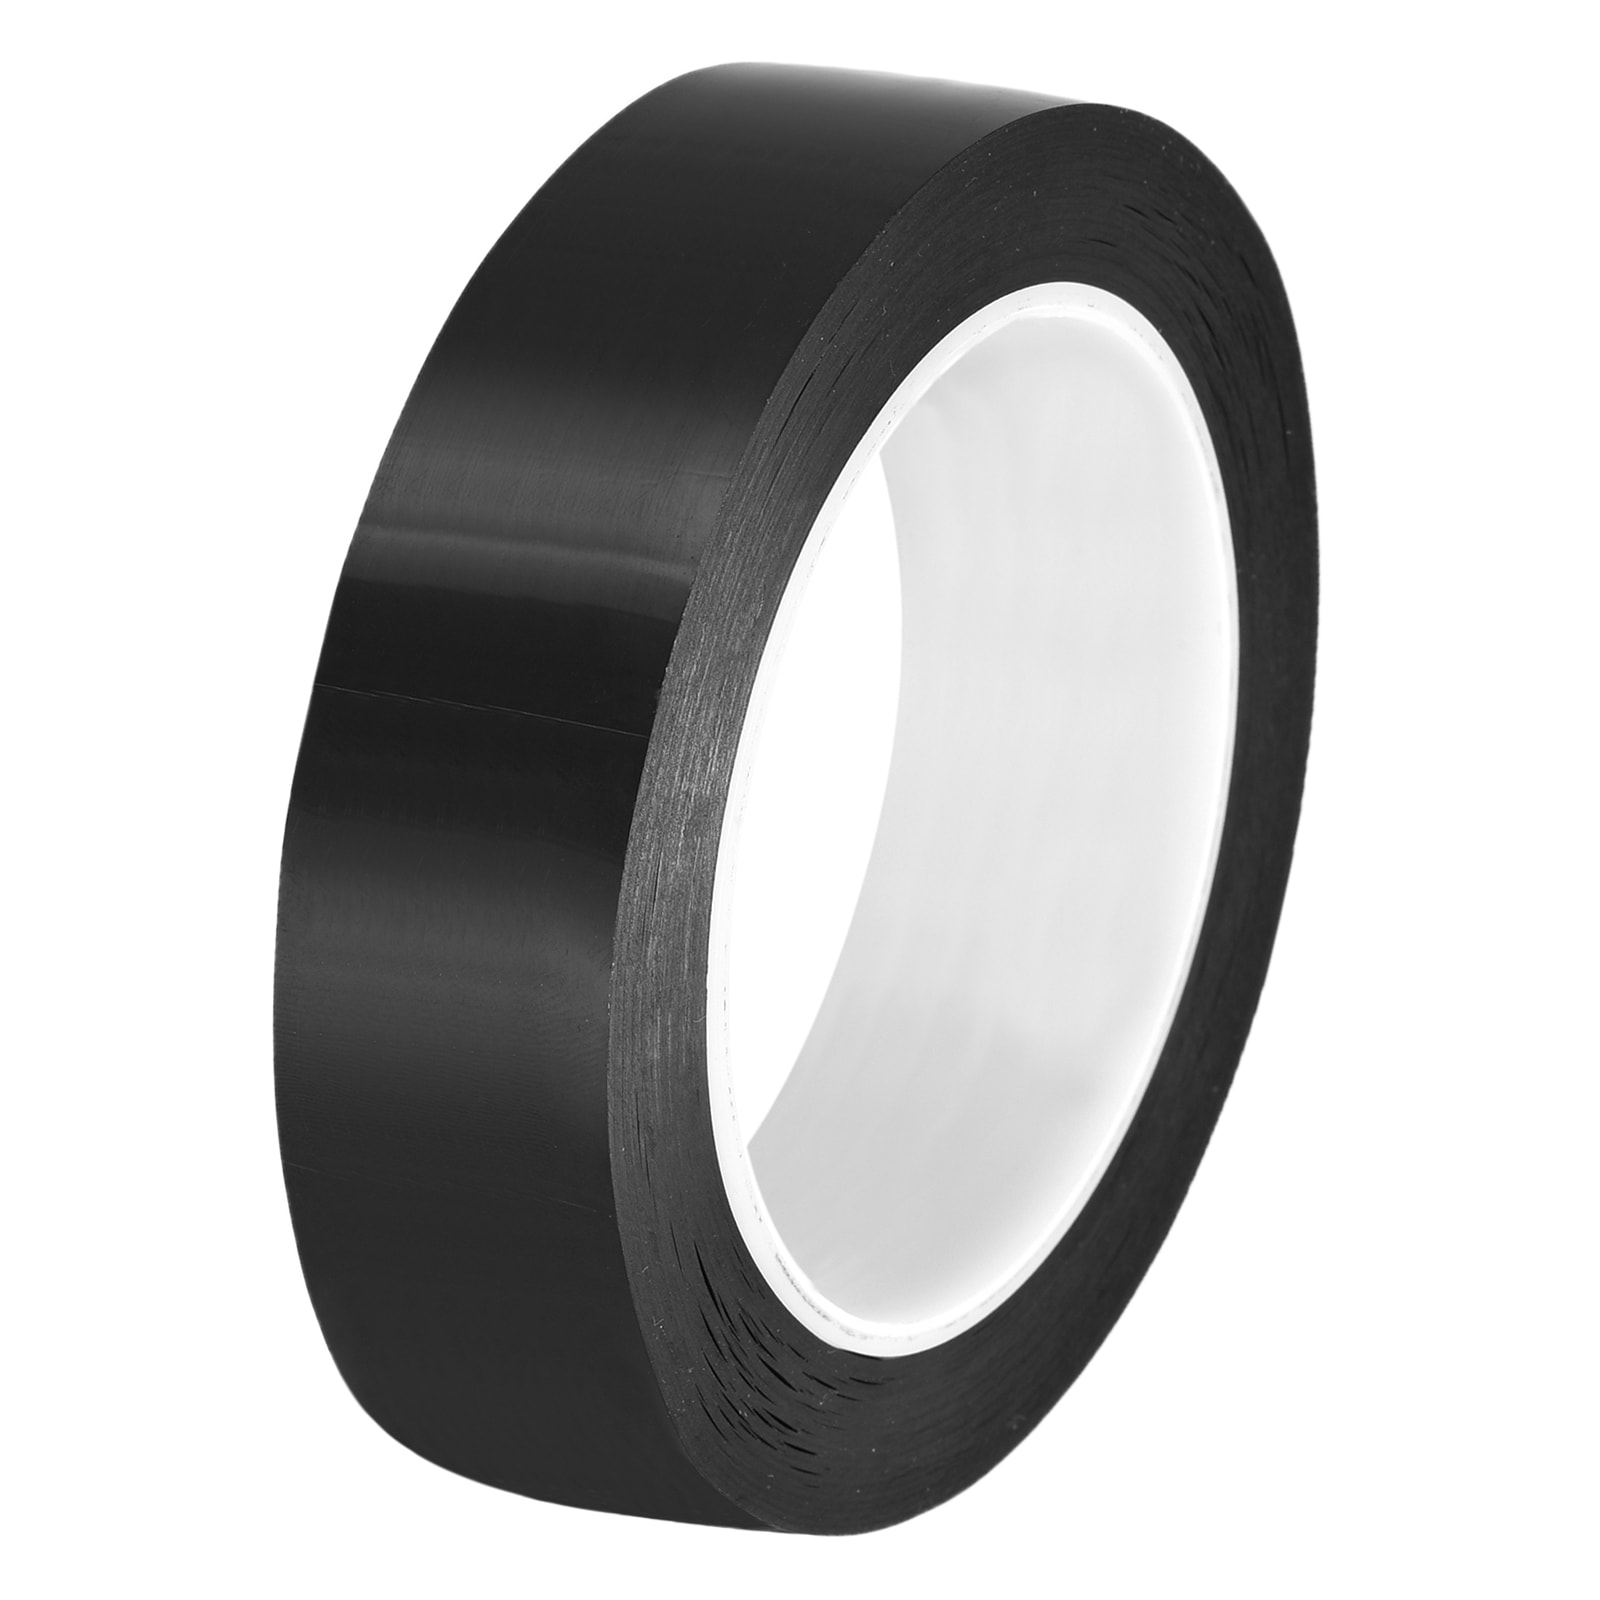 2pcs Whiteboard Tape Graphic Grid Marking Tape 1/2 Inch x 55 Yards - Black  - 1/2 Inch x 55 Yards - Bed Bath & Beyond - 37241393